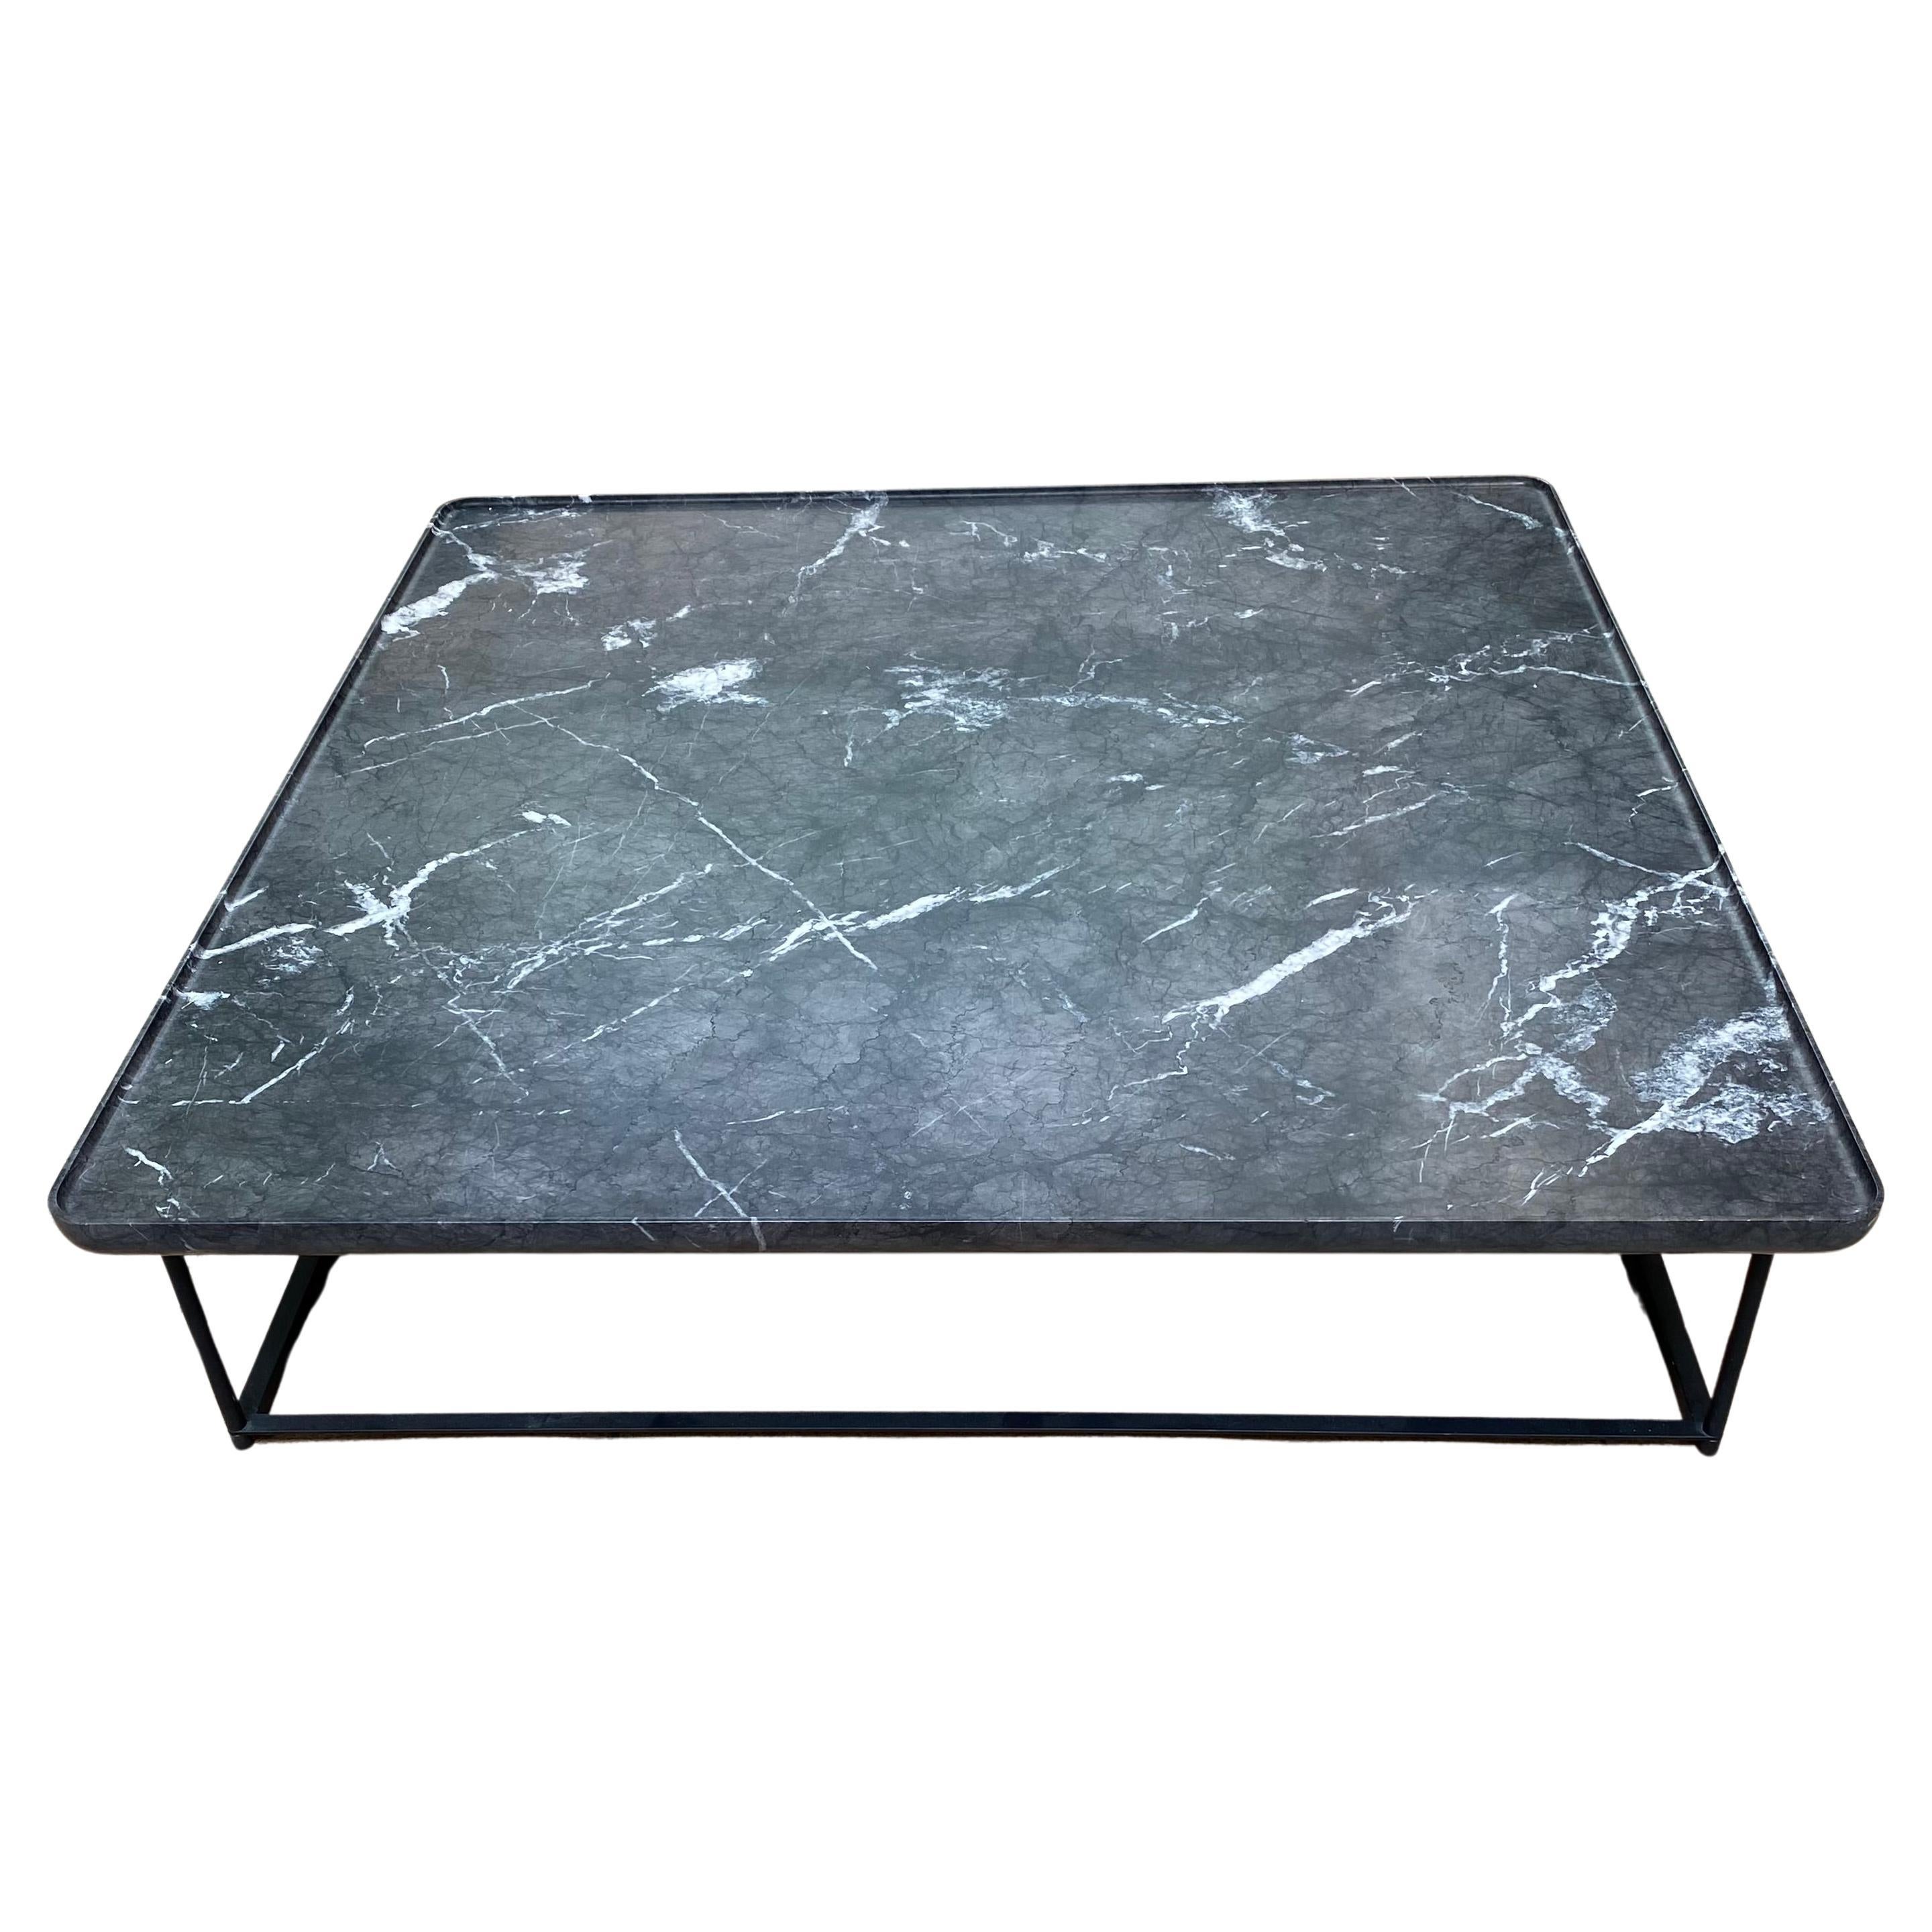 Torei Square Table Grey Carnico Marble - Cassina